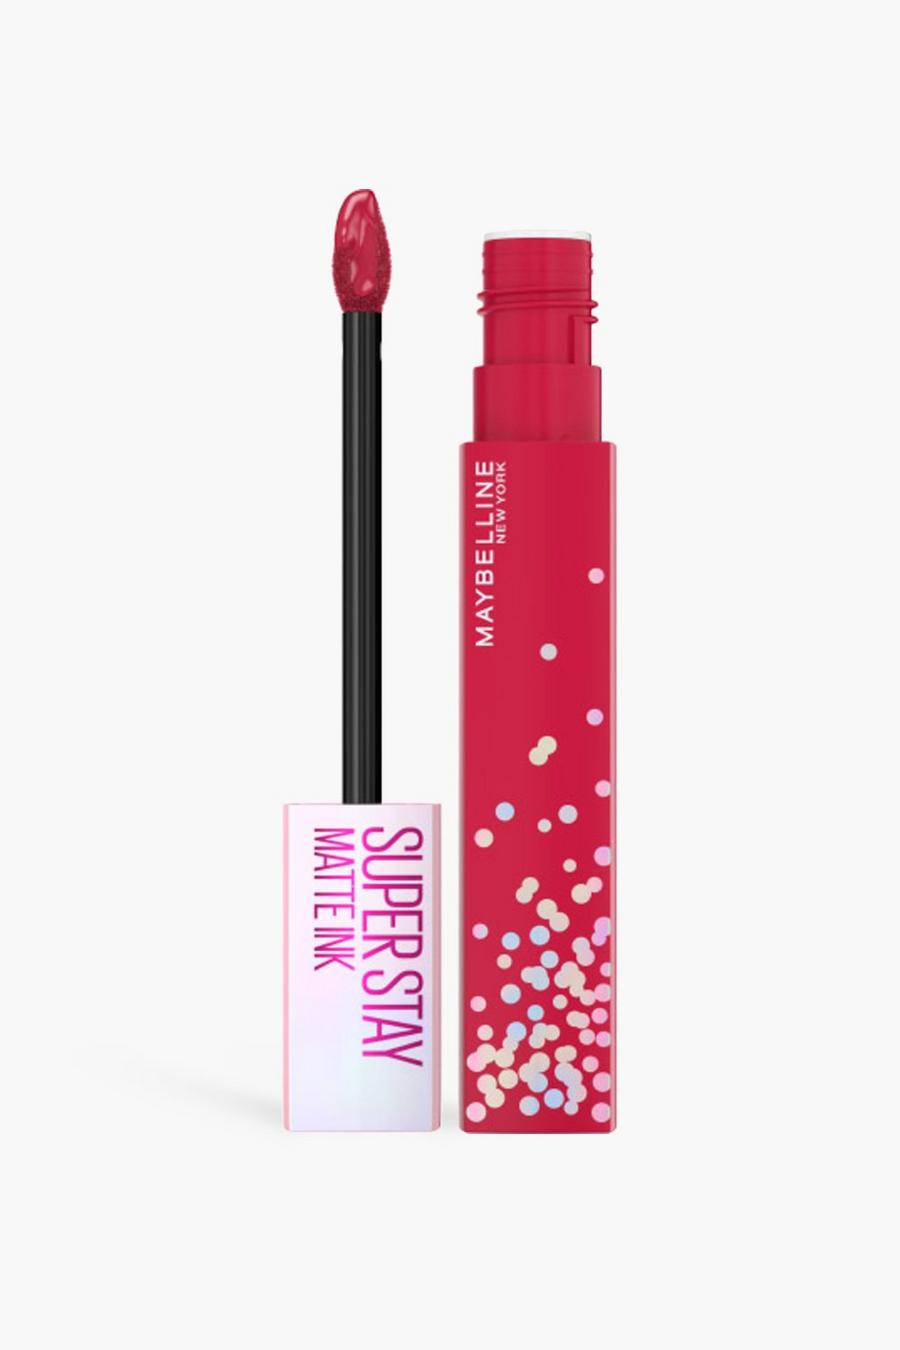 Coral rose Maybelline SuperStay Matte Ink Pink Liquid Lipstick Birthday Edition - Life Of The Party